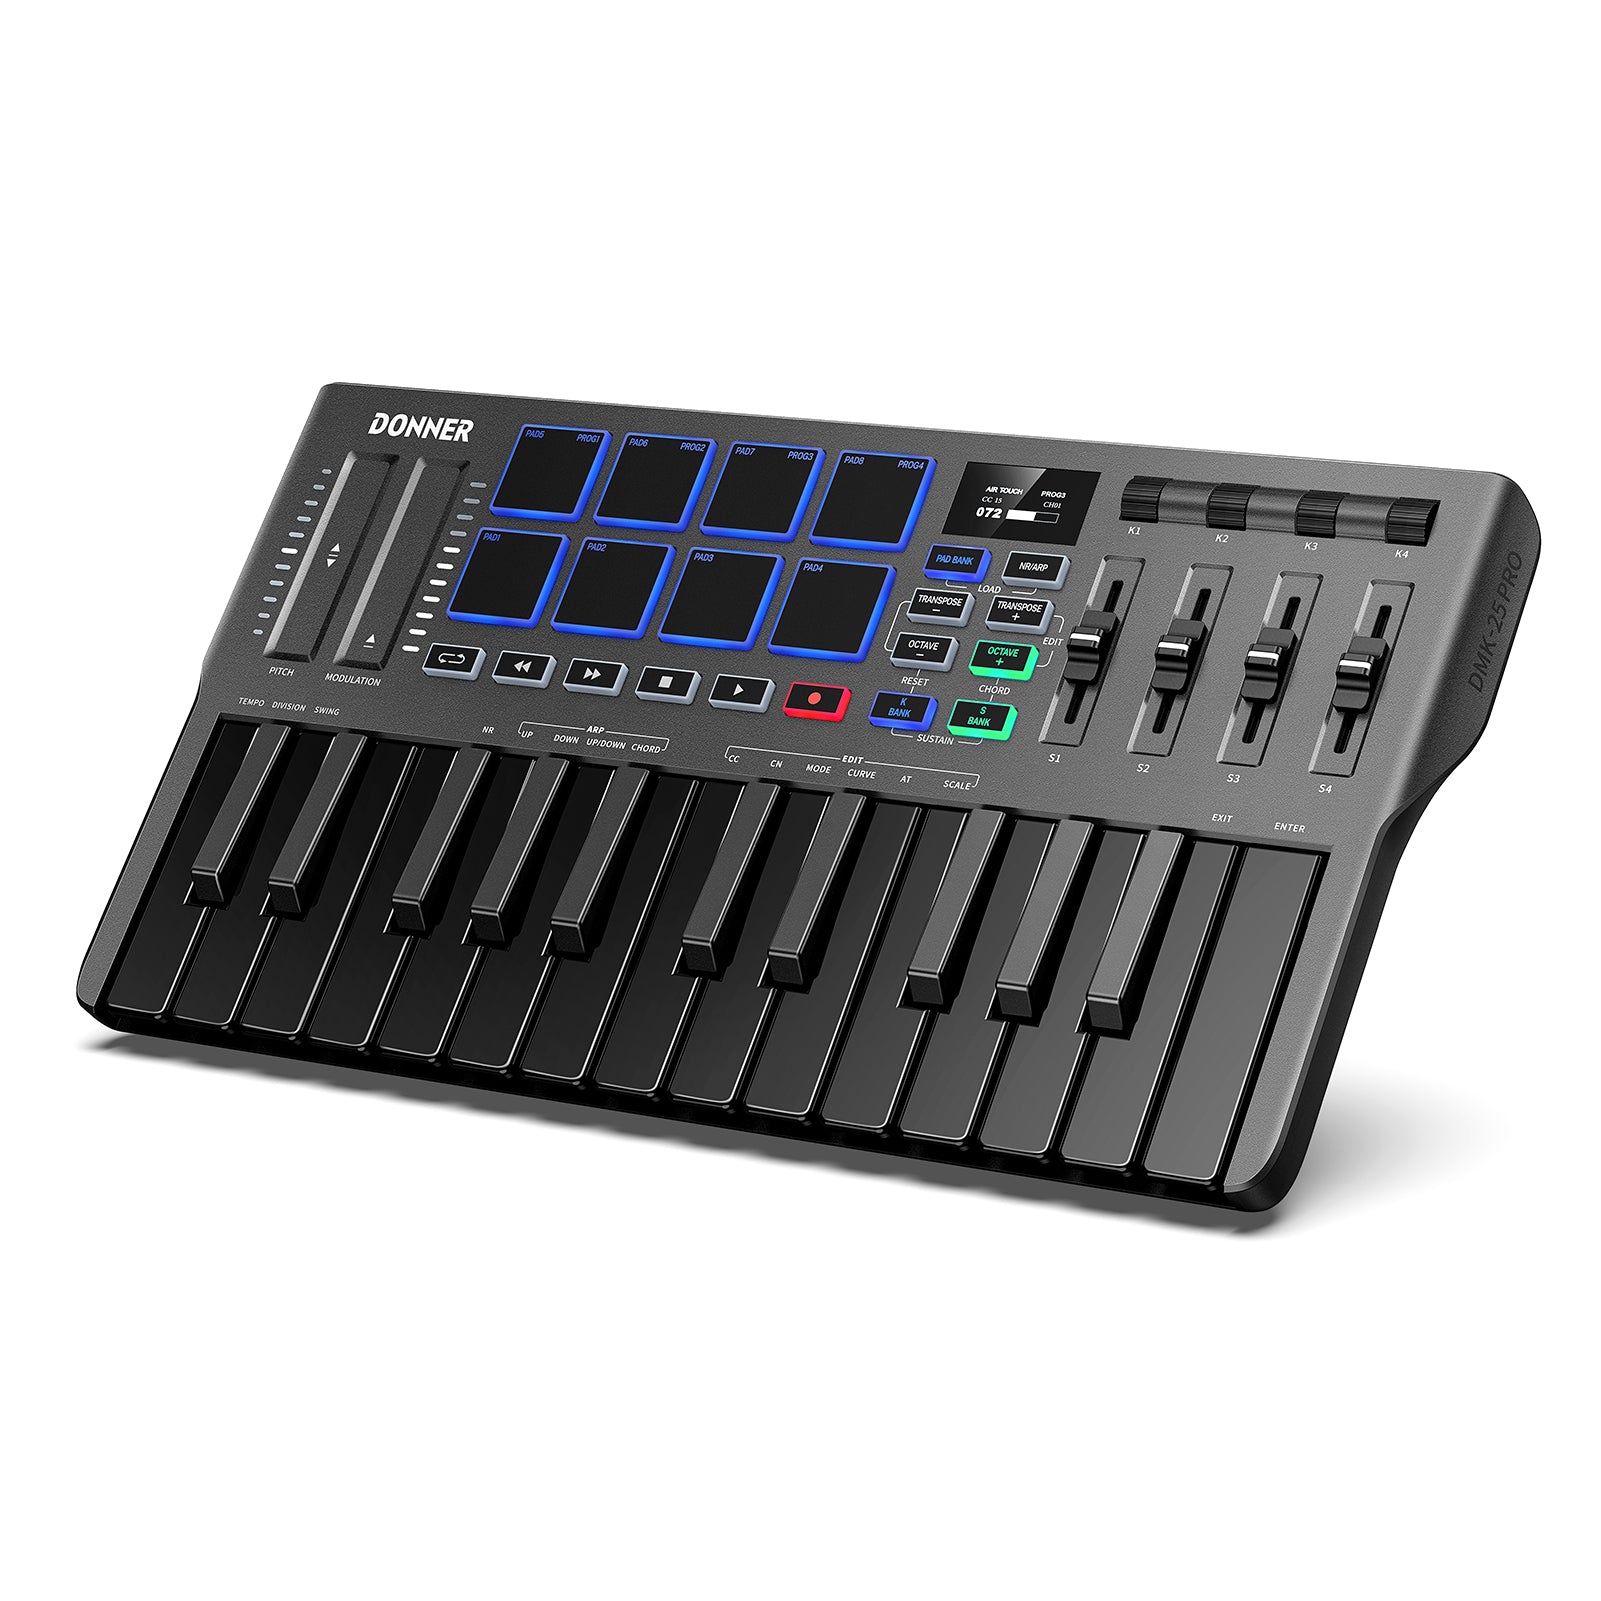 

Donner DMK-25 PRO MIDI Keyboard Controller with Personalized Touch Bar, Free Music Production Software/Free 40 Courses